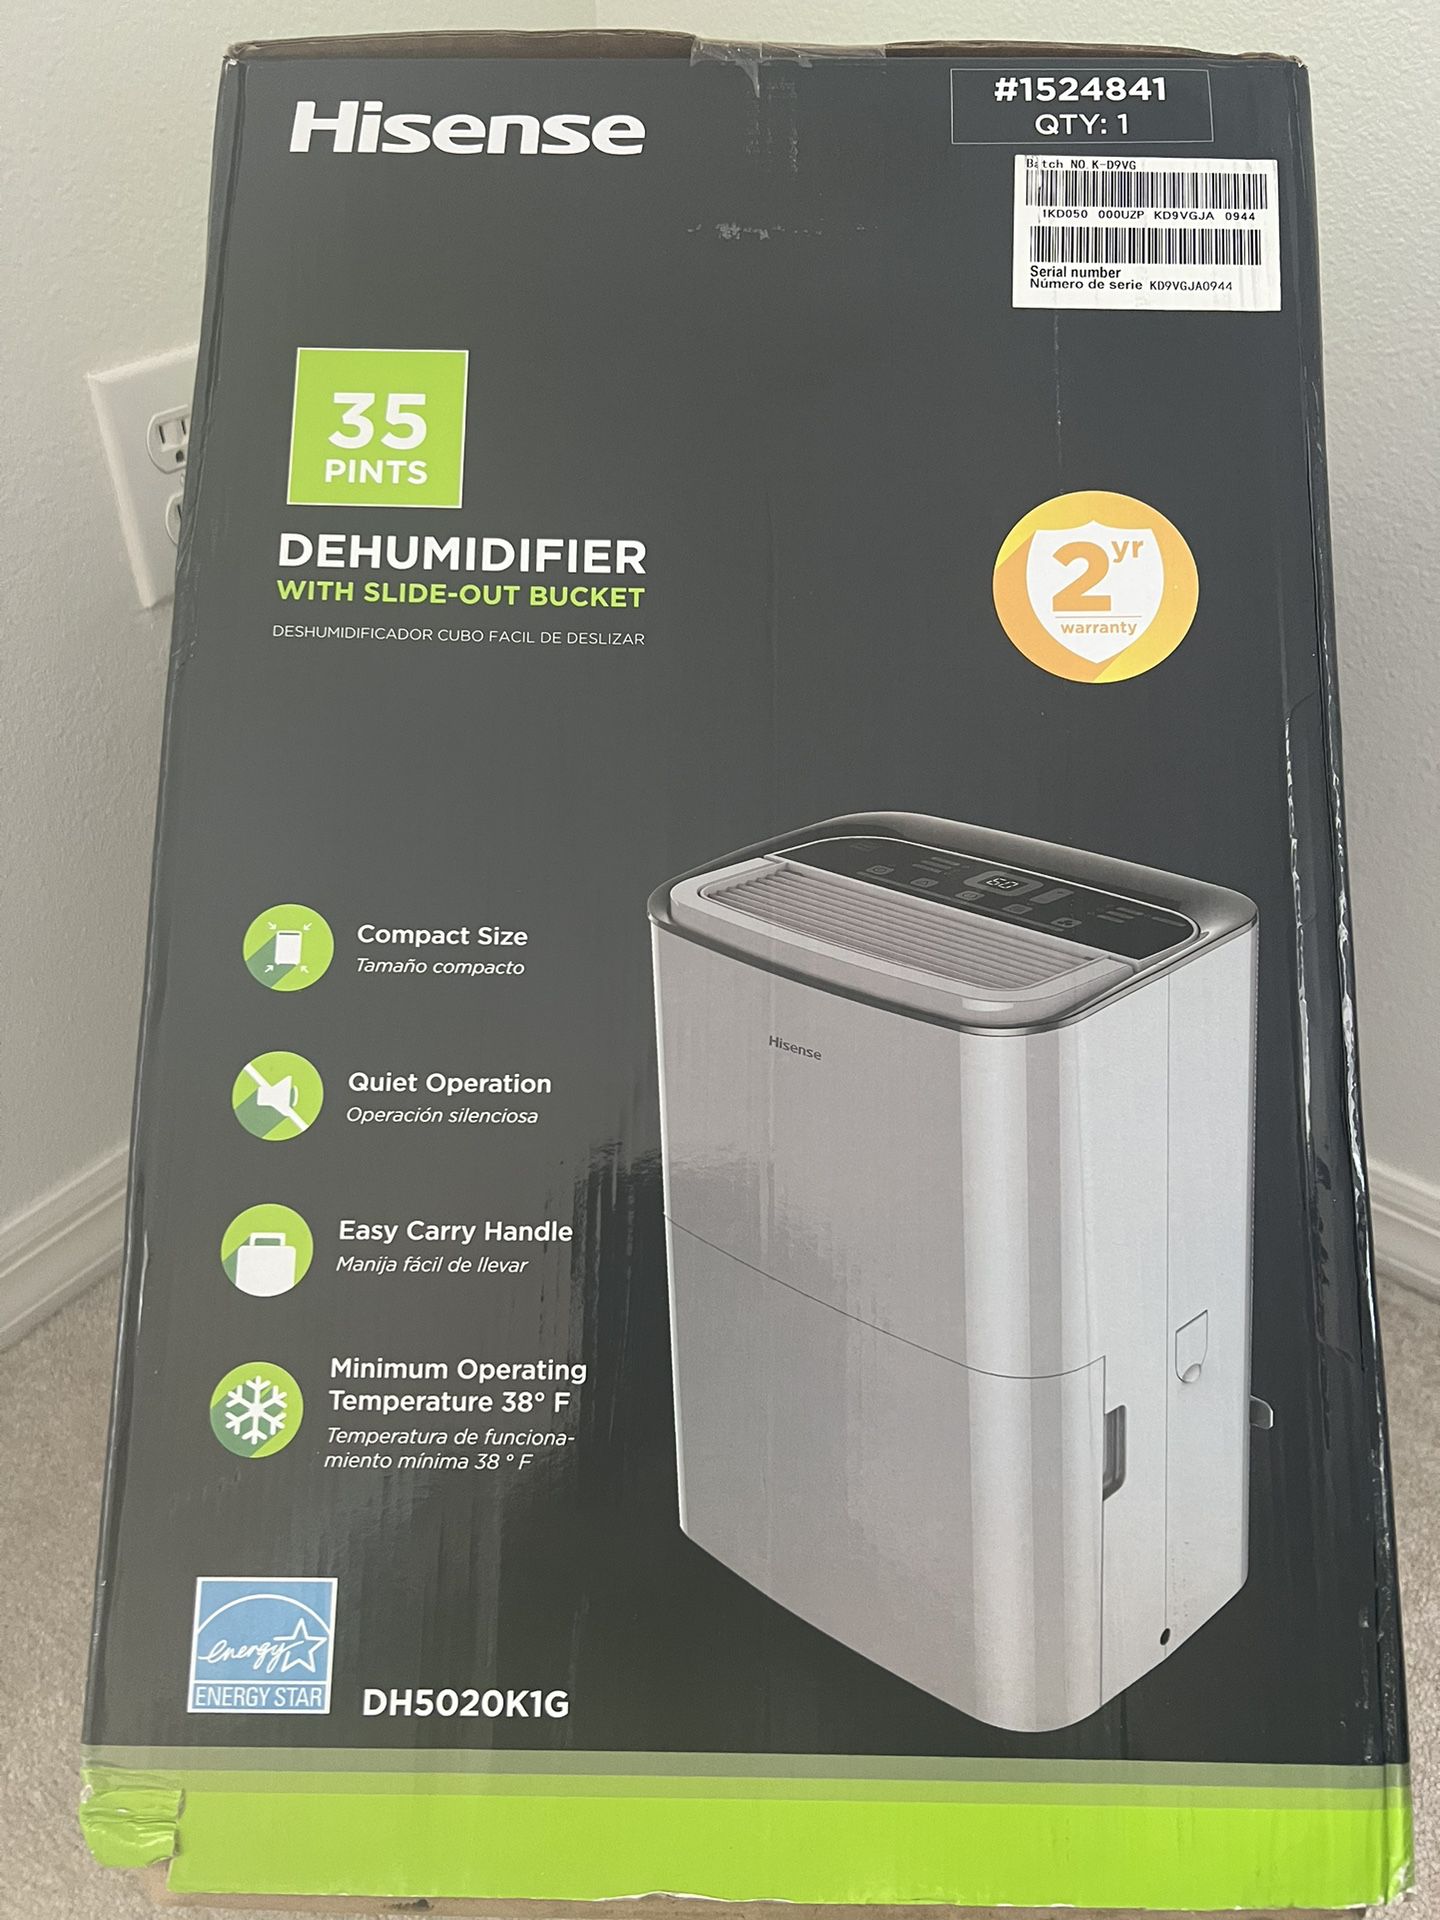 Brand New Dehumidifier In Original Packaging Box Never Opened Or Used 